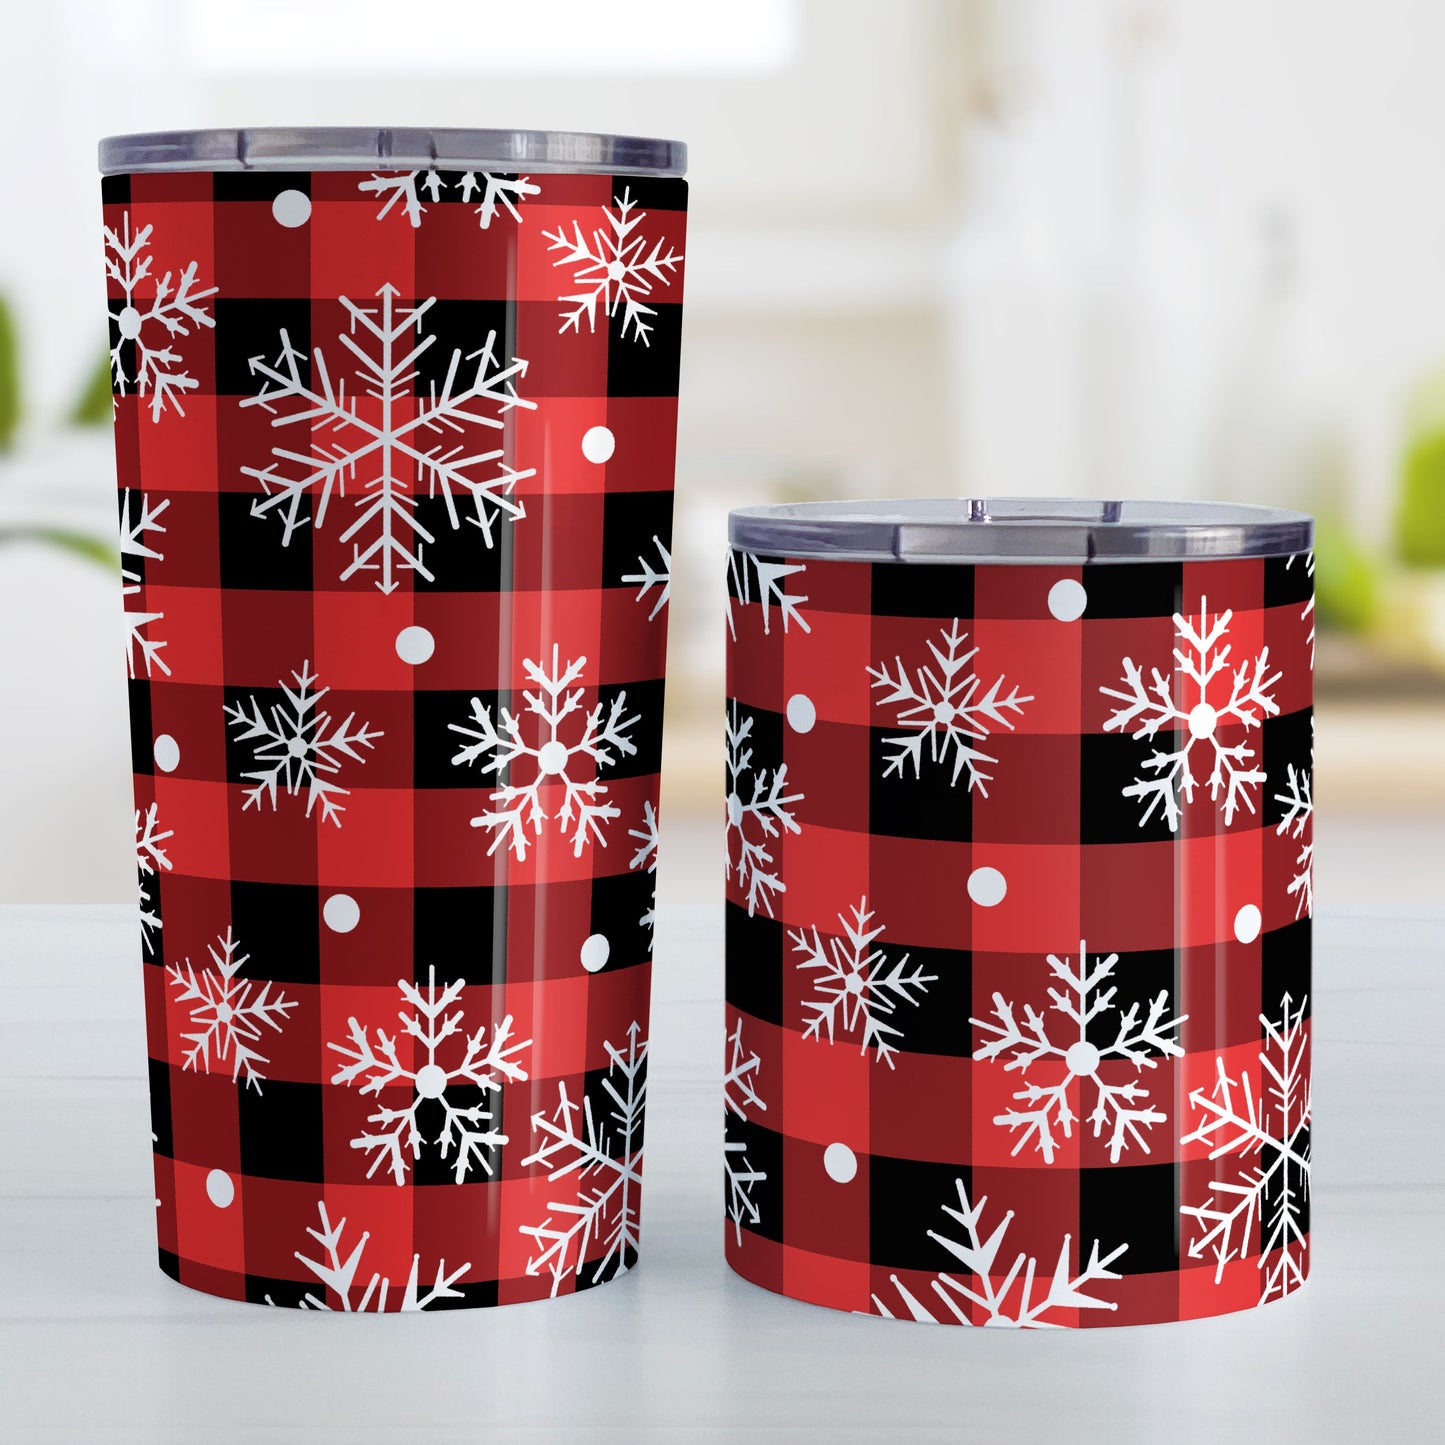 Red and Black Buffalo Plaid Snowflake Tumbler Cups (20oz and 10oz) at Amy's Coffee Mugs. Stainless steel insulated tumbler cups designed with a pattern of white snowflakes over a red and black buffalo plaid pattern that wraps around the cups. Photo shows both sized cups next to each other.